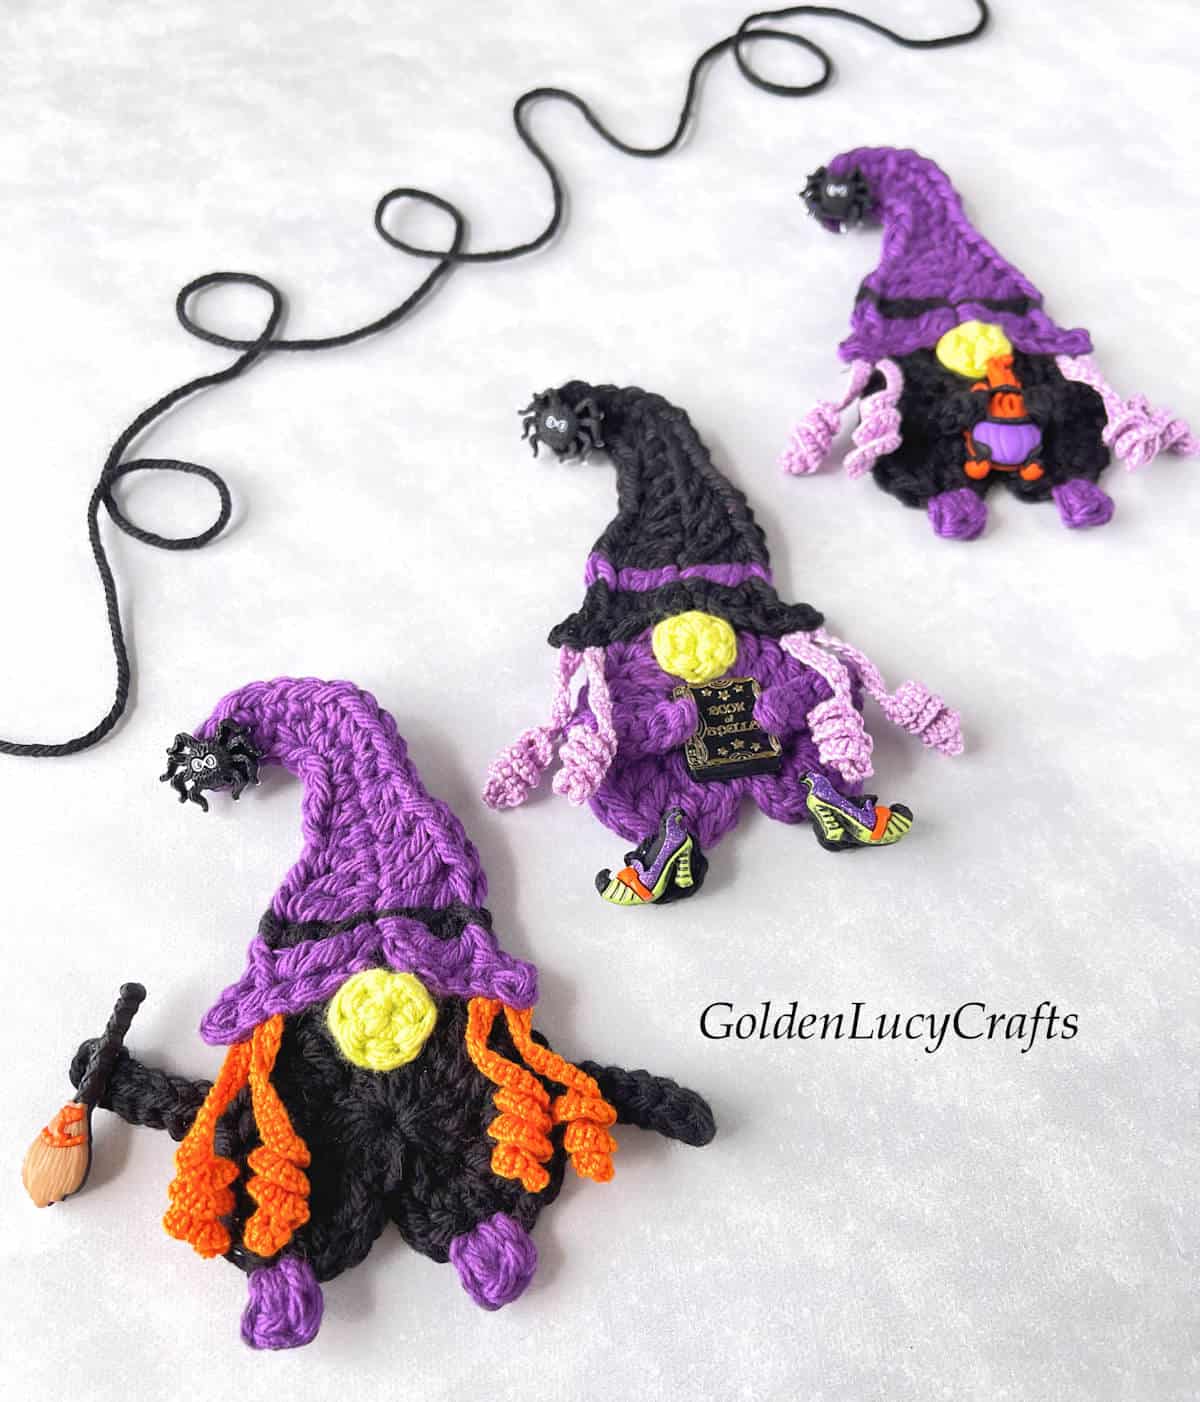 Three crocheted witch appliques.